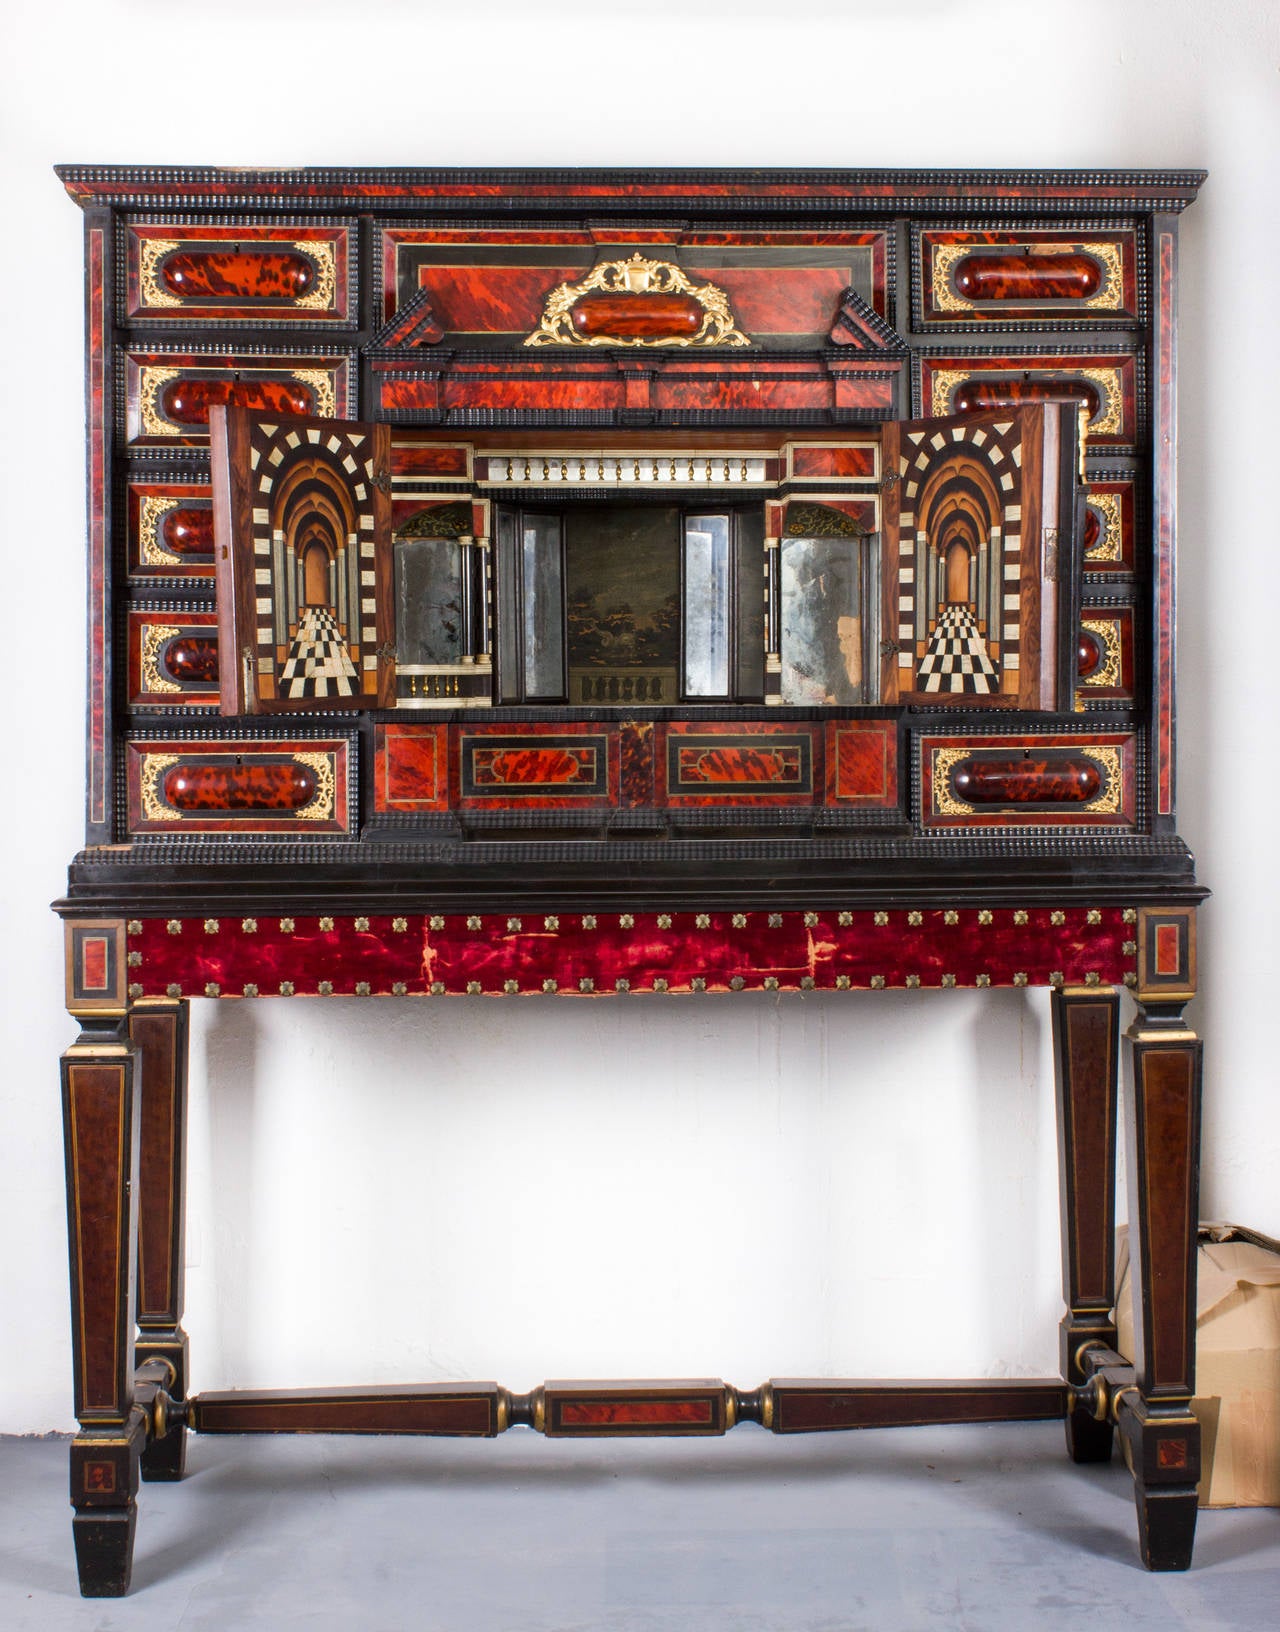 17th C. Amberes cabinet with Interior decorated with mirrors and chess floor in perspective and pyro engraved.